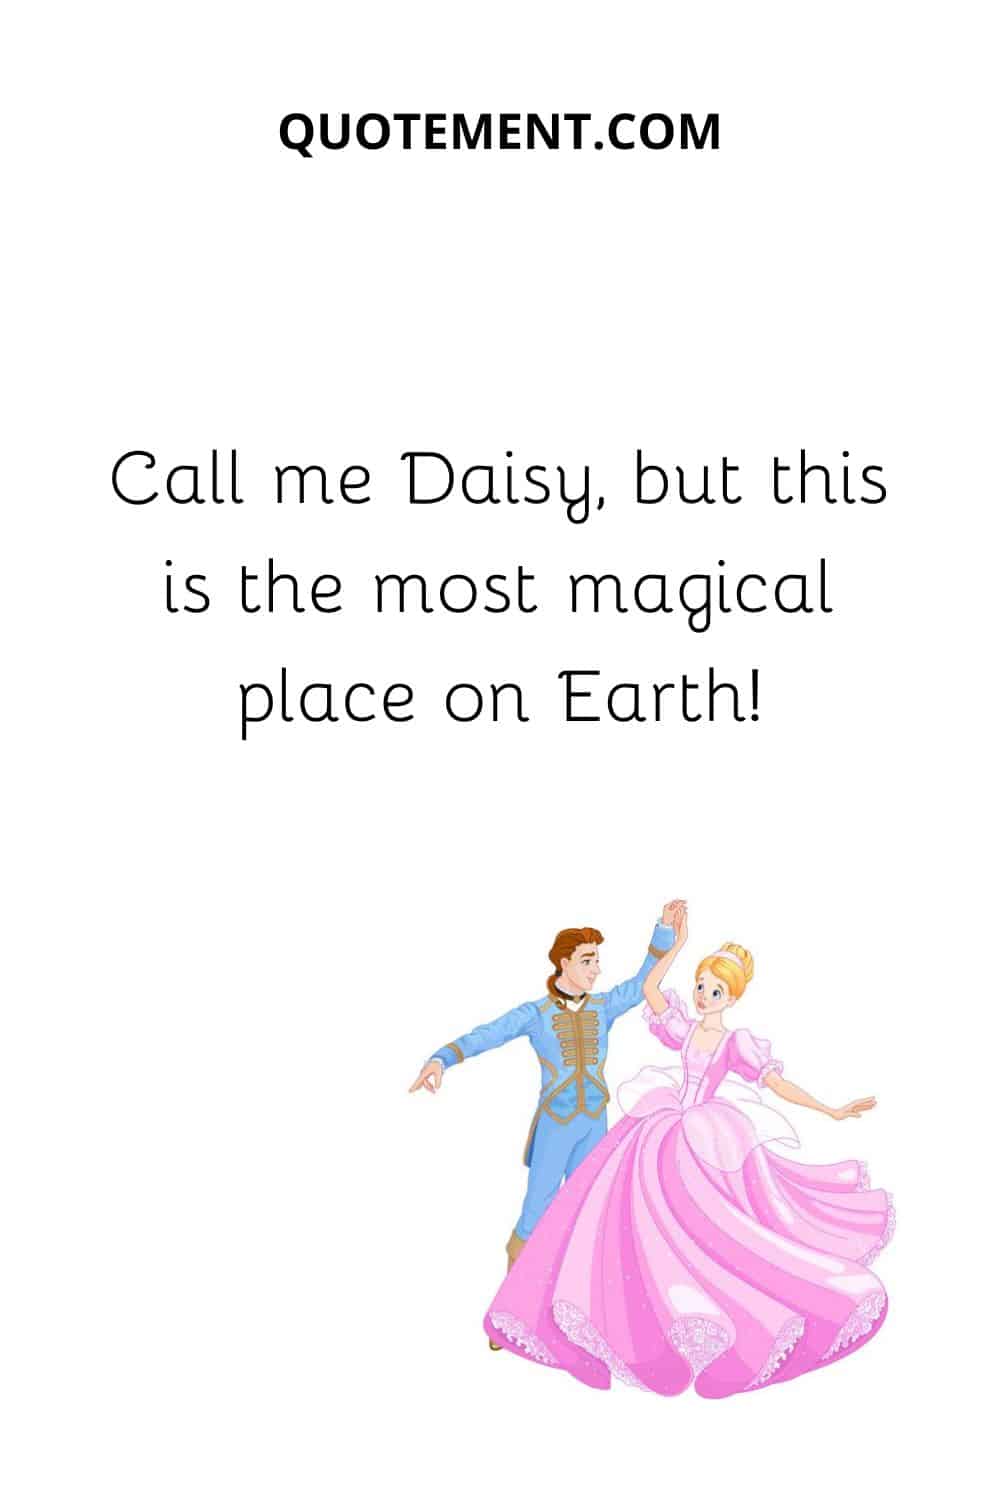 Call me Daisy, but this is the most magical place on Earth!